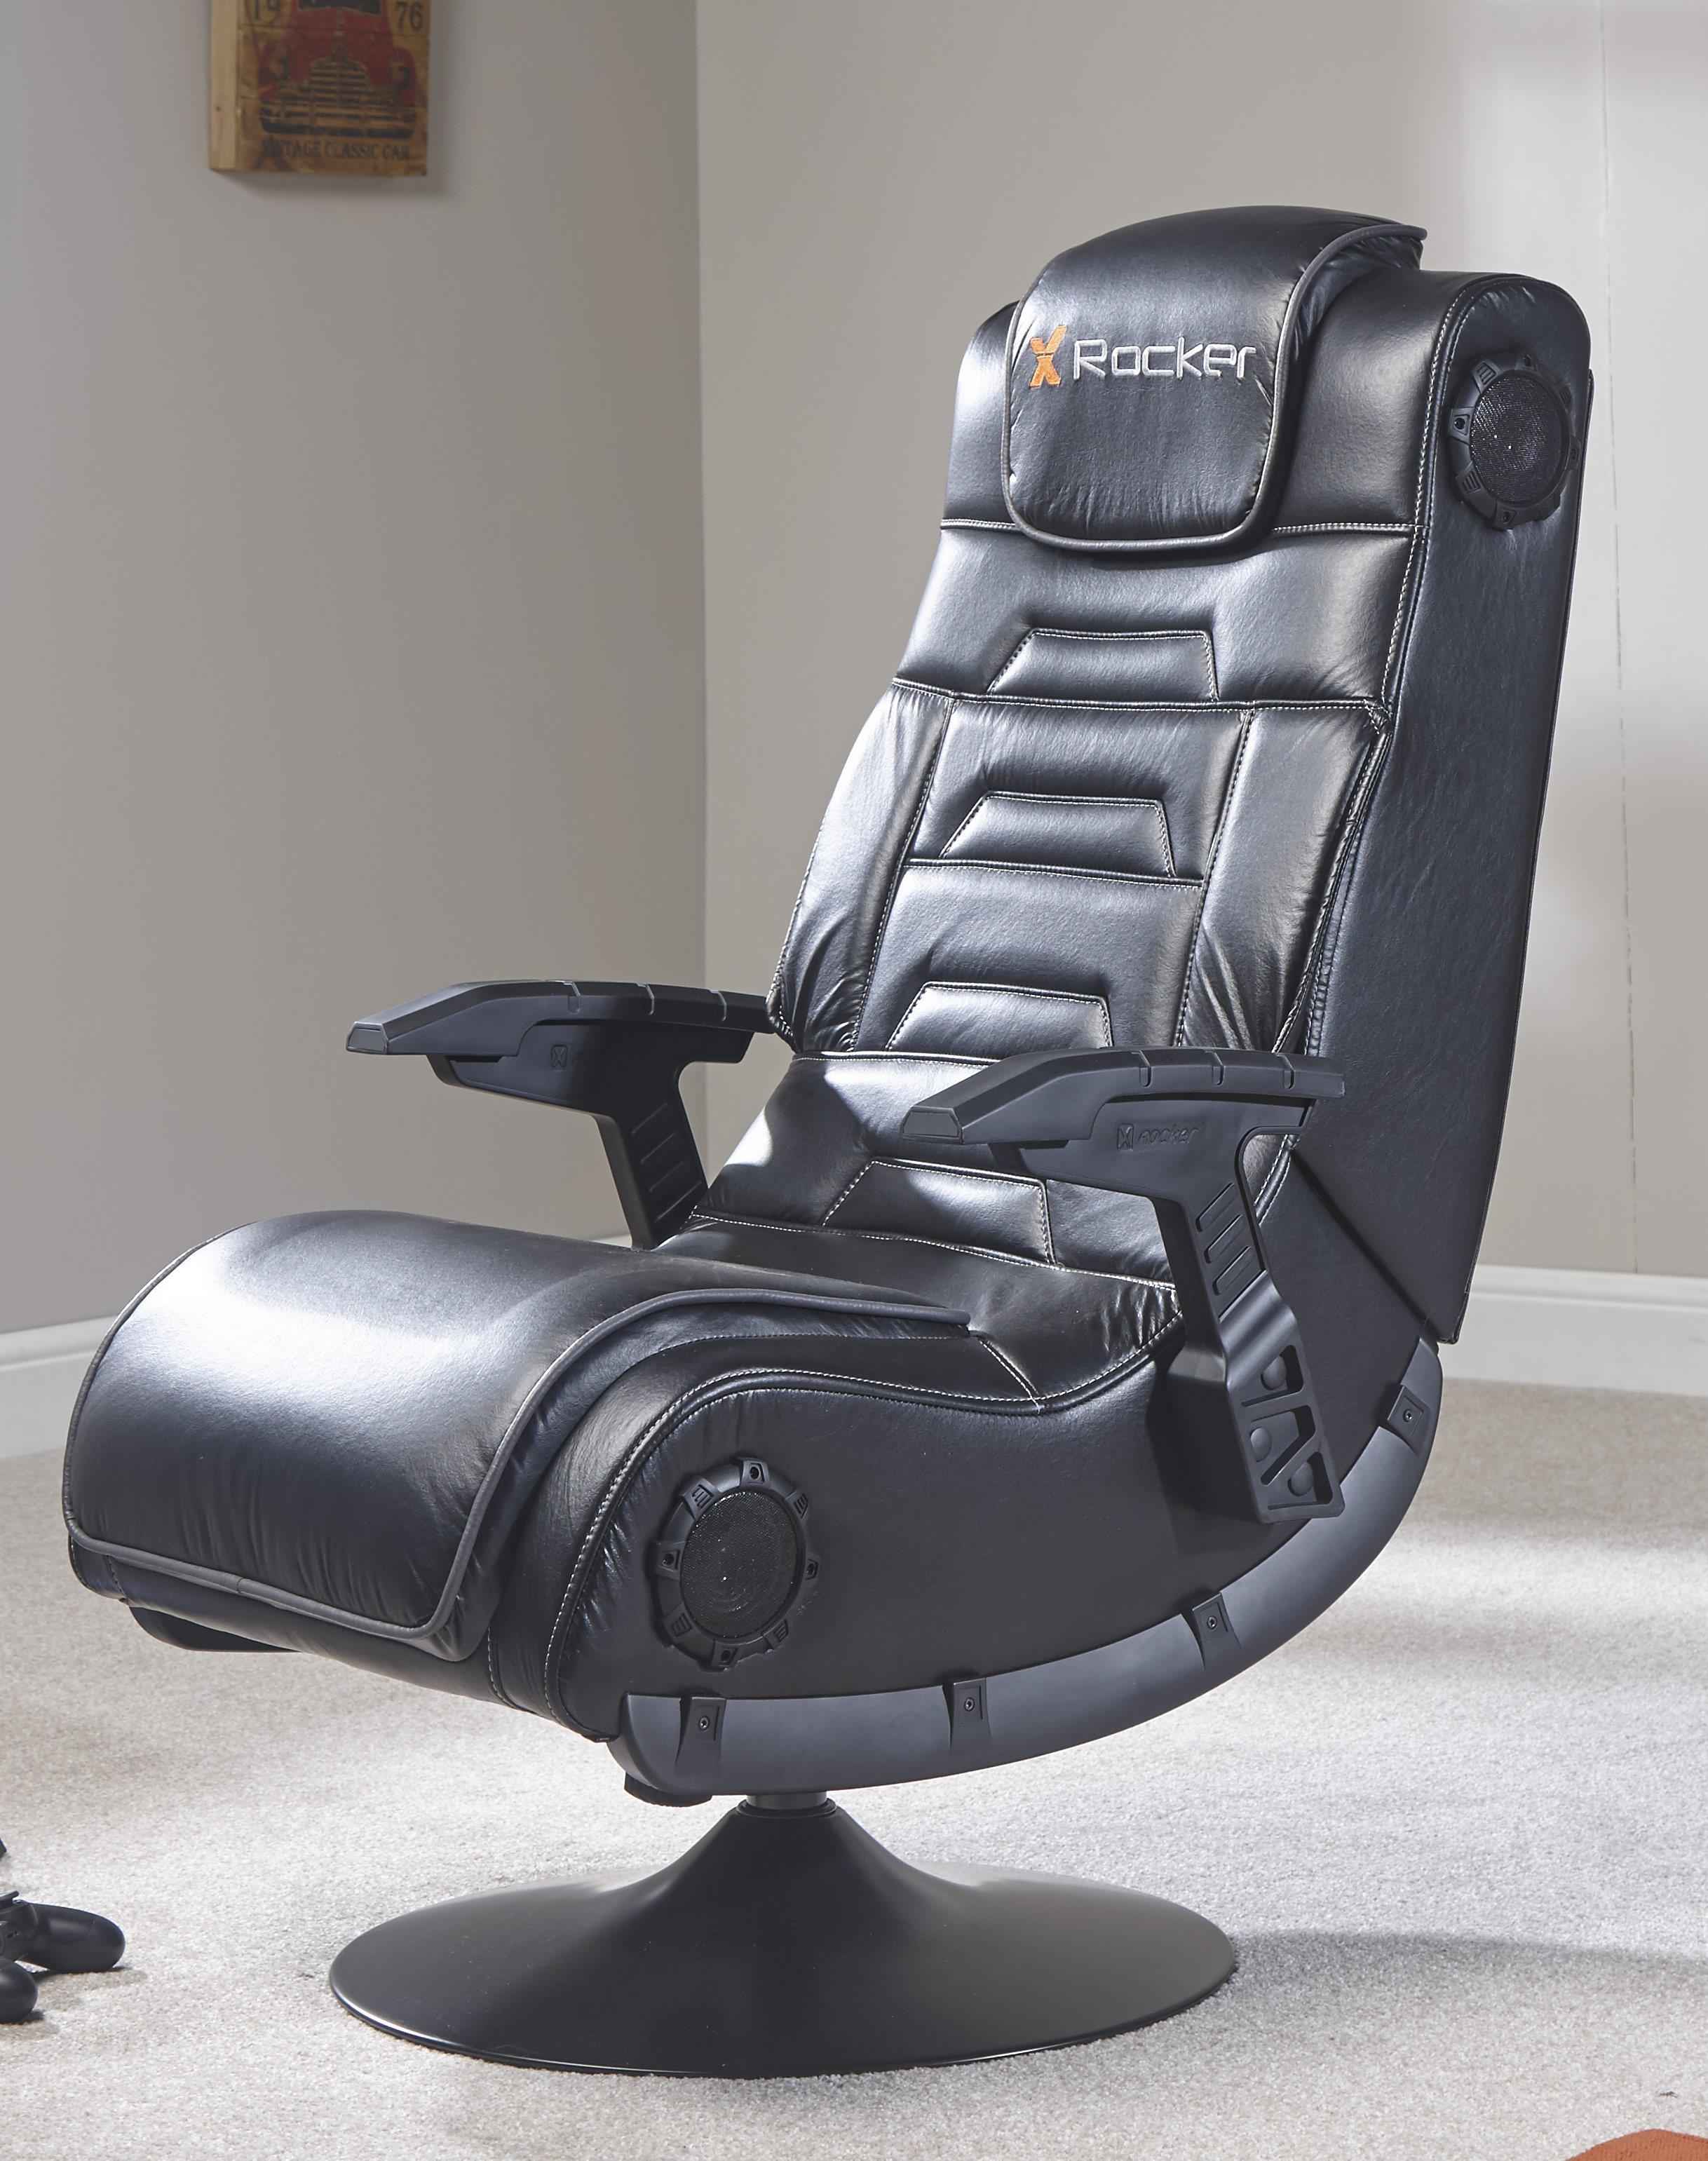 X Rocker Pro 4.1 Pedestal Console gaming chair Upholstered